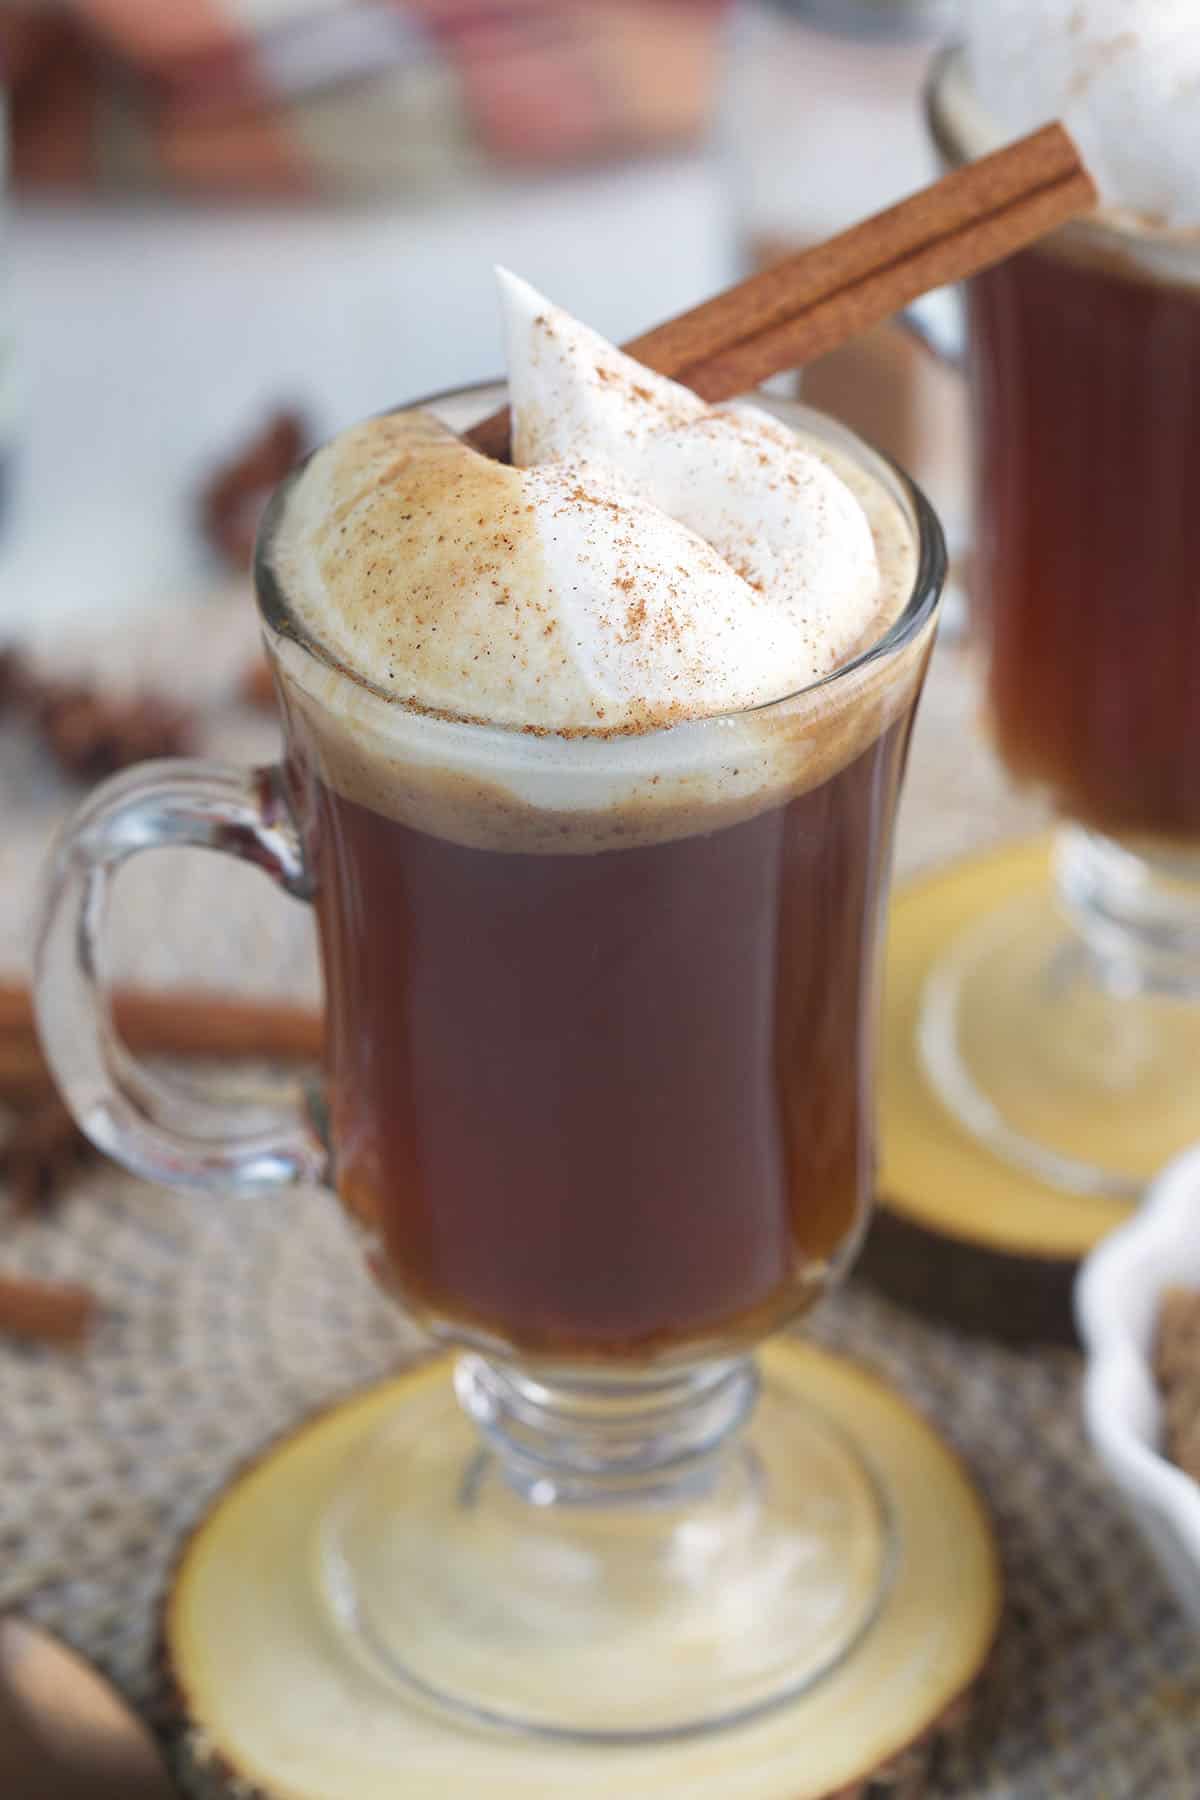 Whipped cream and a cinnamon stick garnish a glass mug of hot buttered rum.